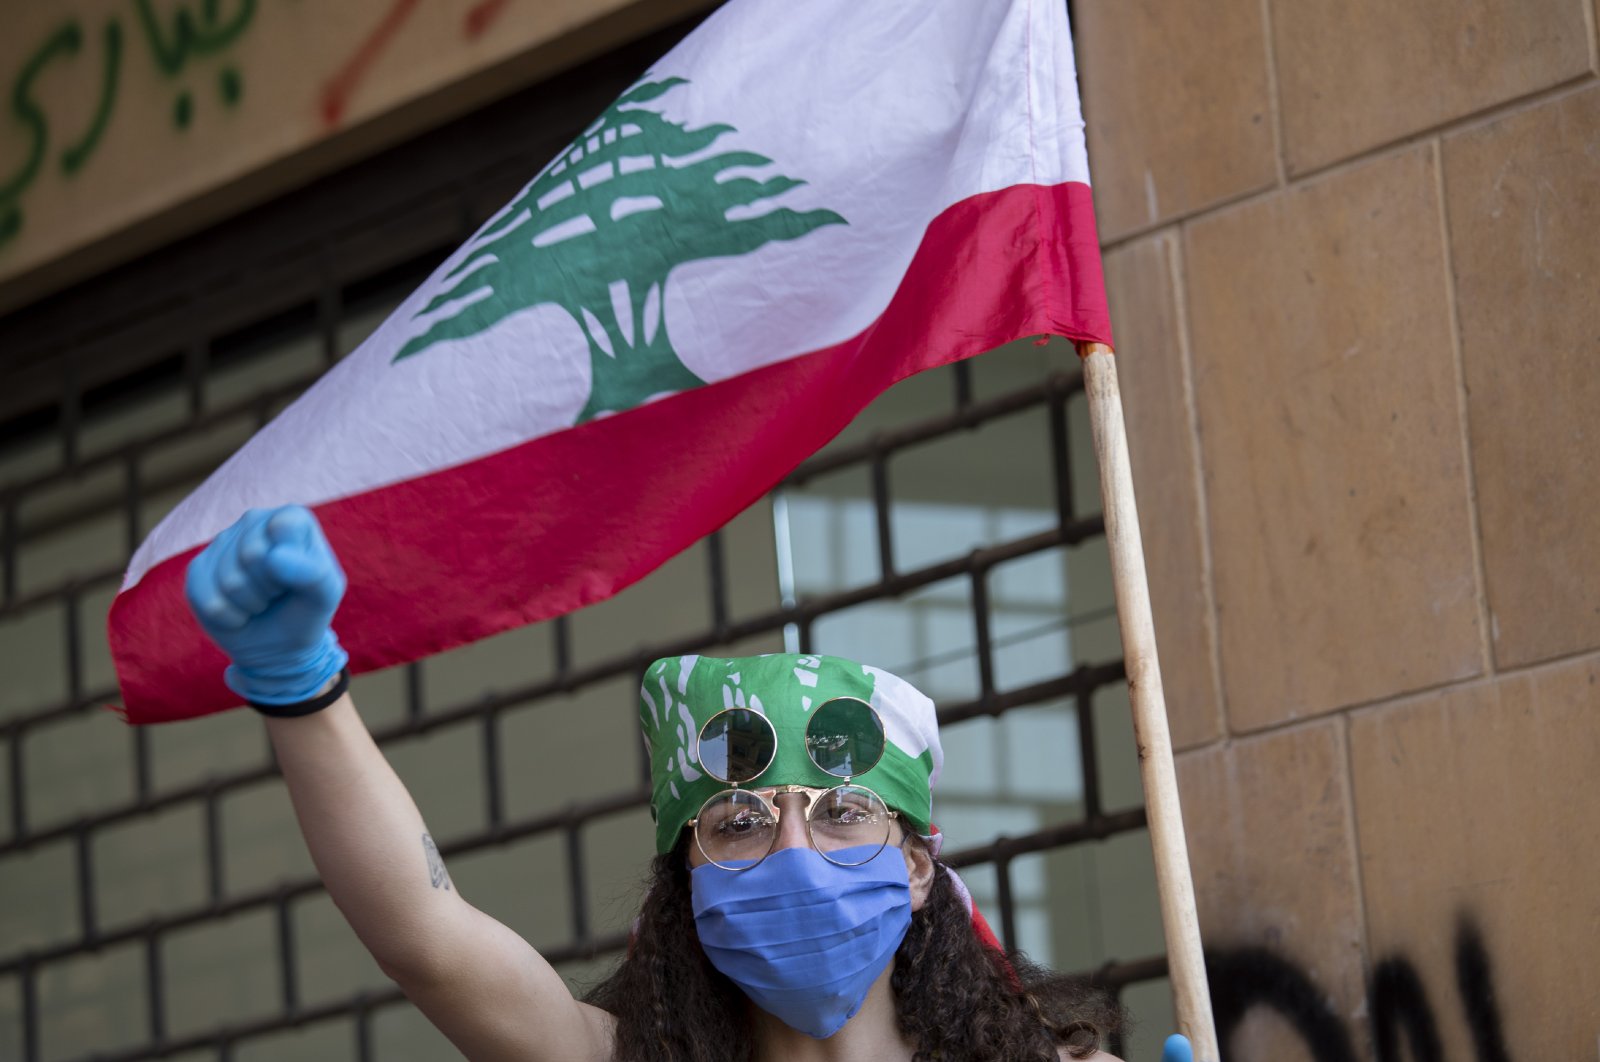 An anti-government protester shouts slogans, while wearing a mask to help curb the spread of the coronavirus, during ongoing protests in front of the Ministry of Economy, in downtown Beirut, Lebanon, May 18, 2020. (AP Photo)